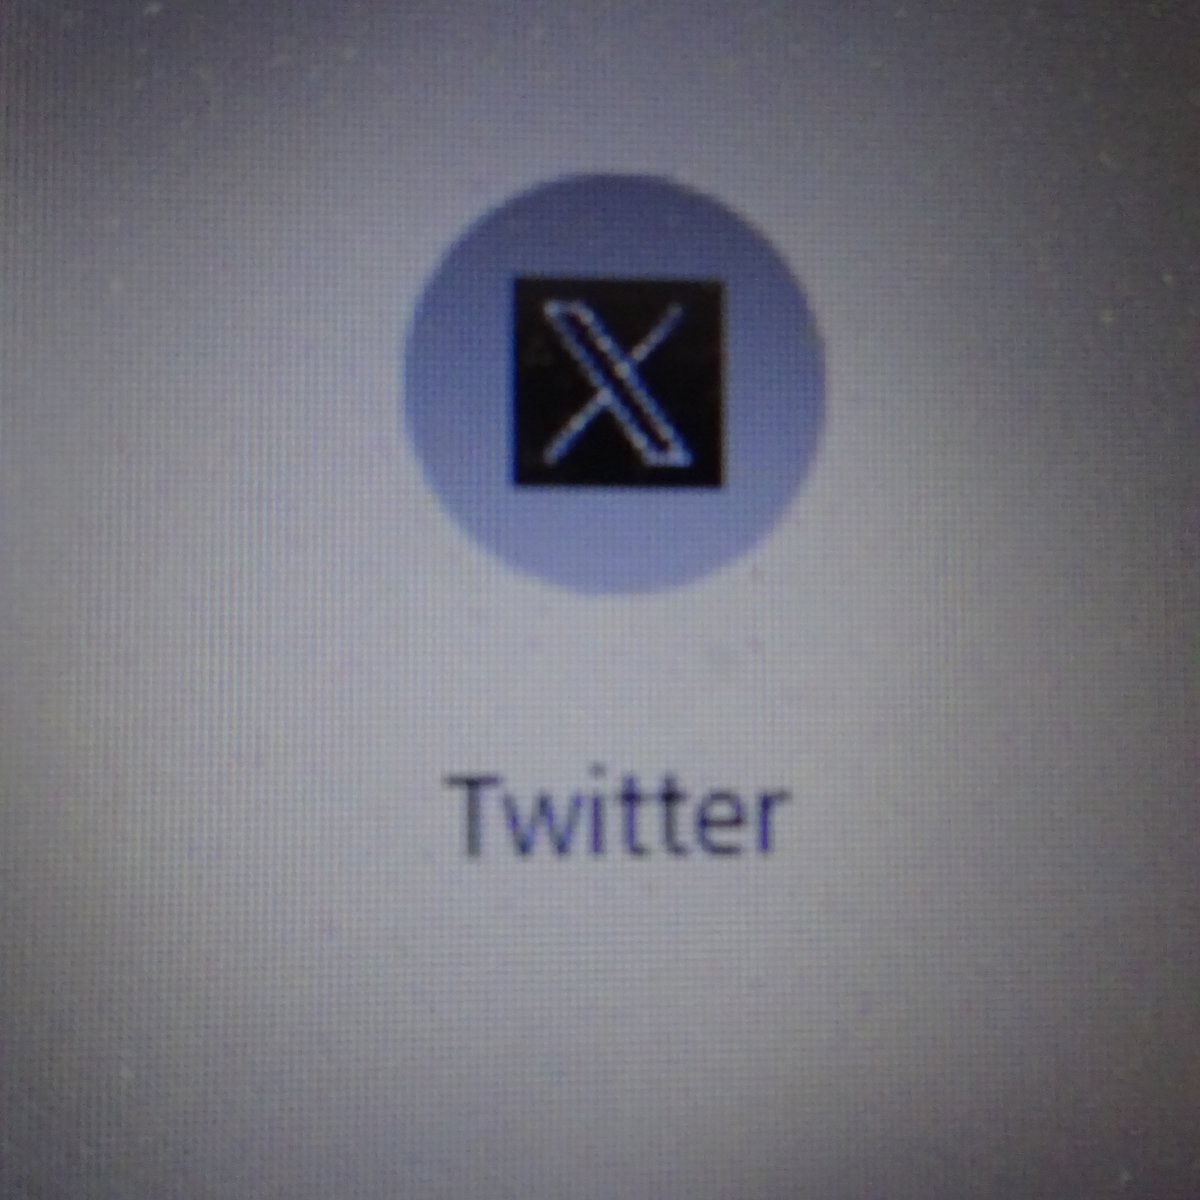 My laptop still has Twitter on it, so...'A Twitter by any other name is still a Twitter!!
#IRestMyCase